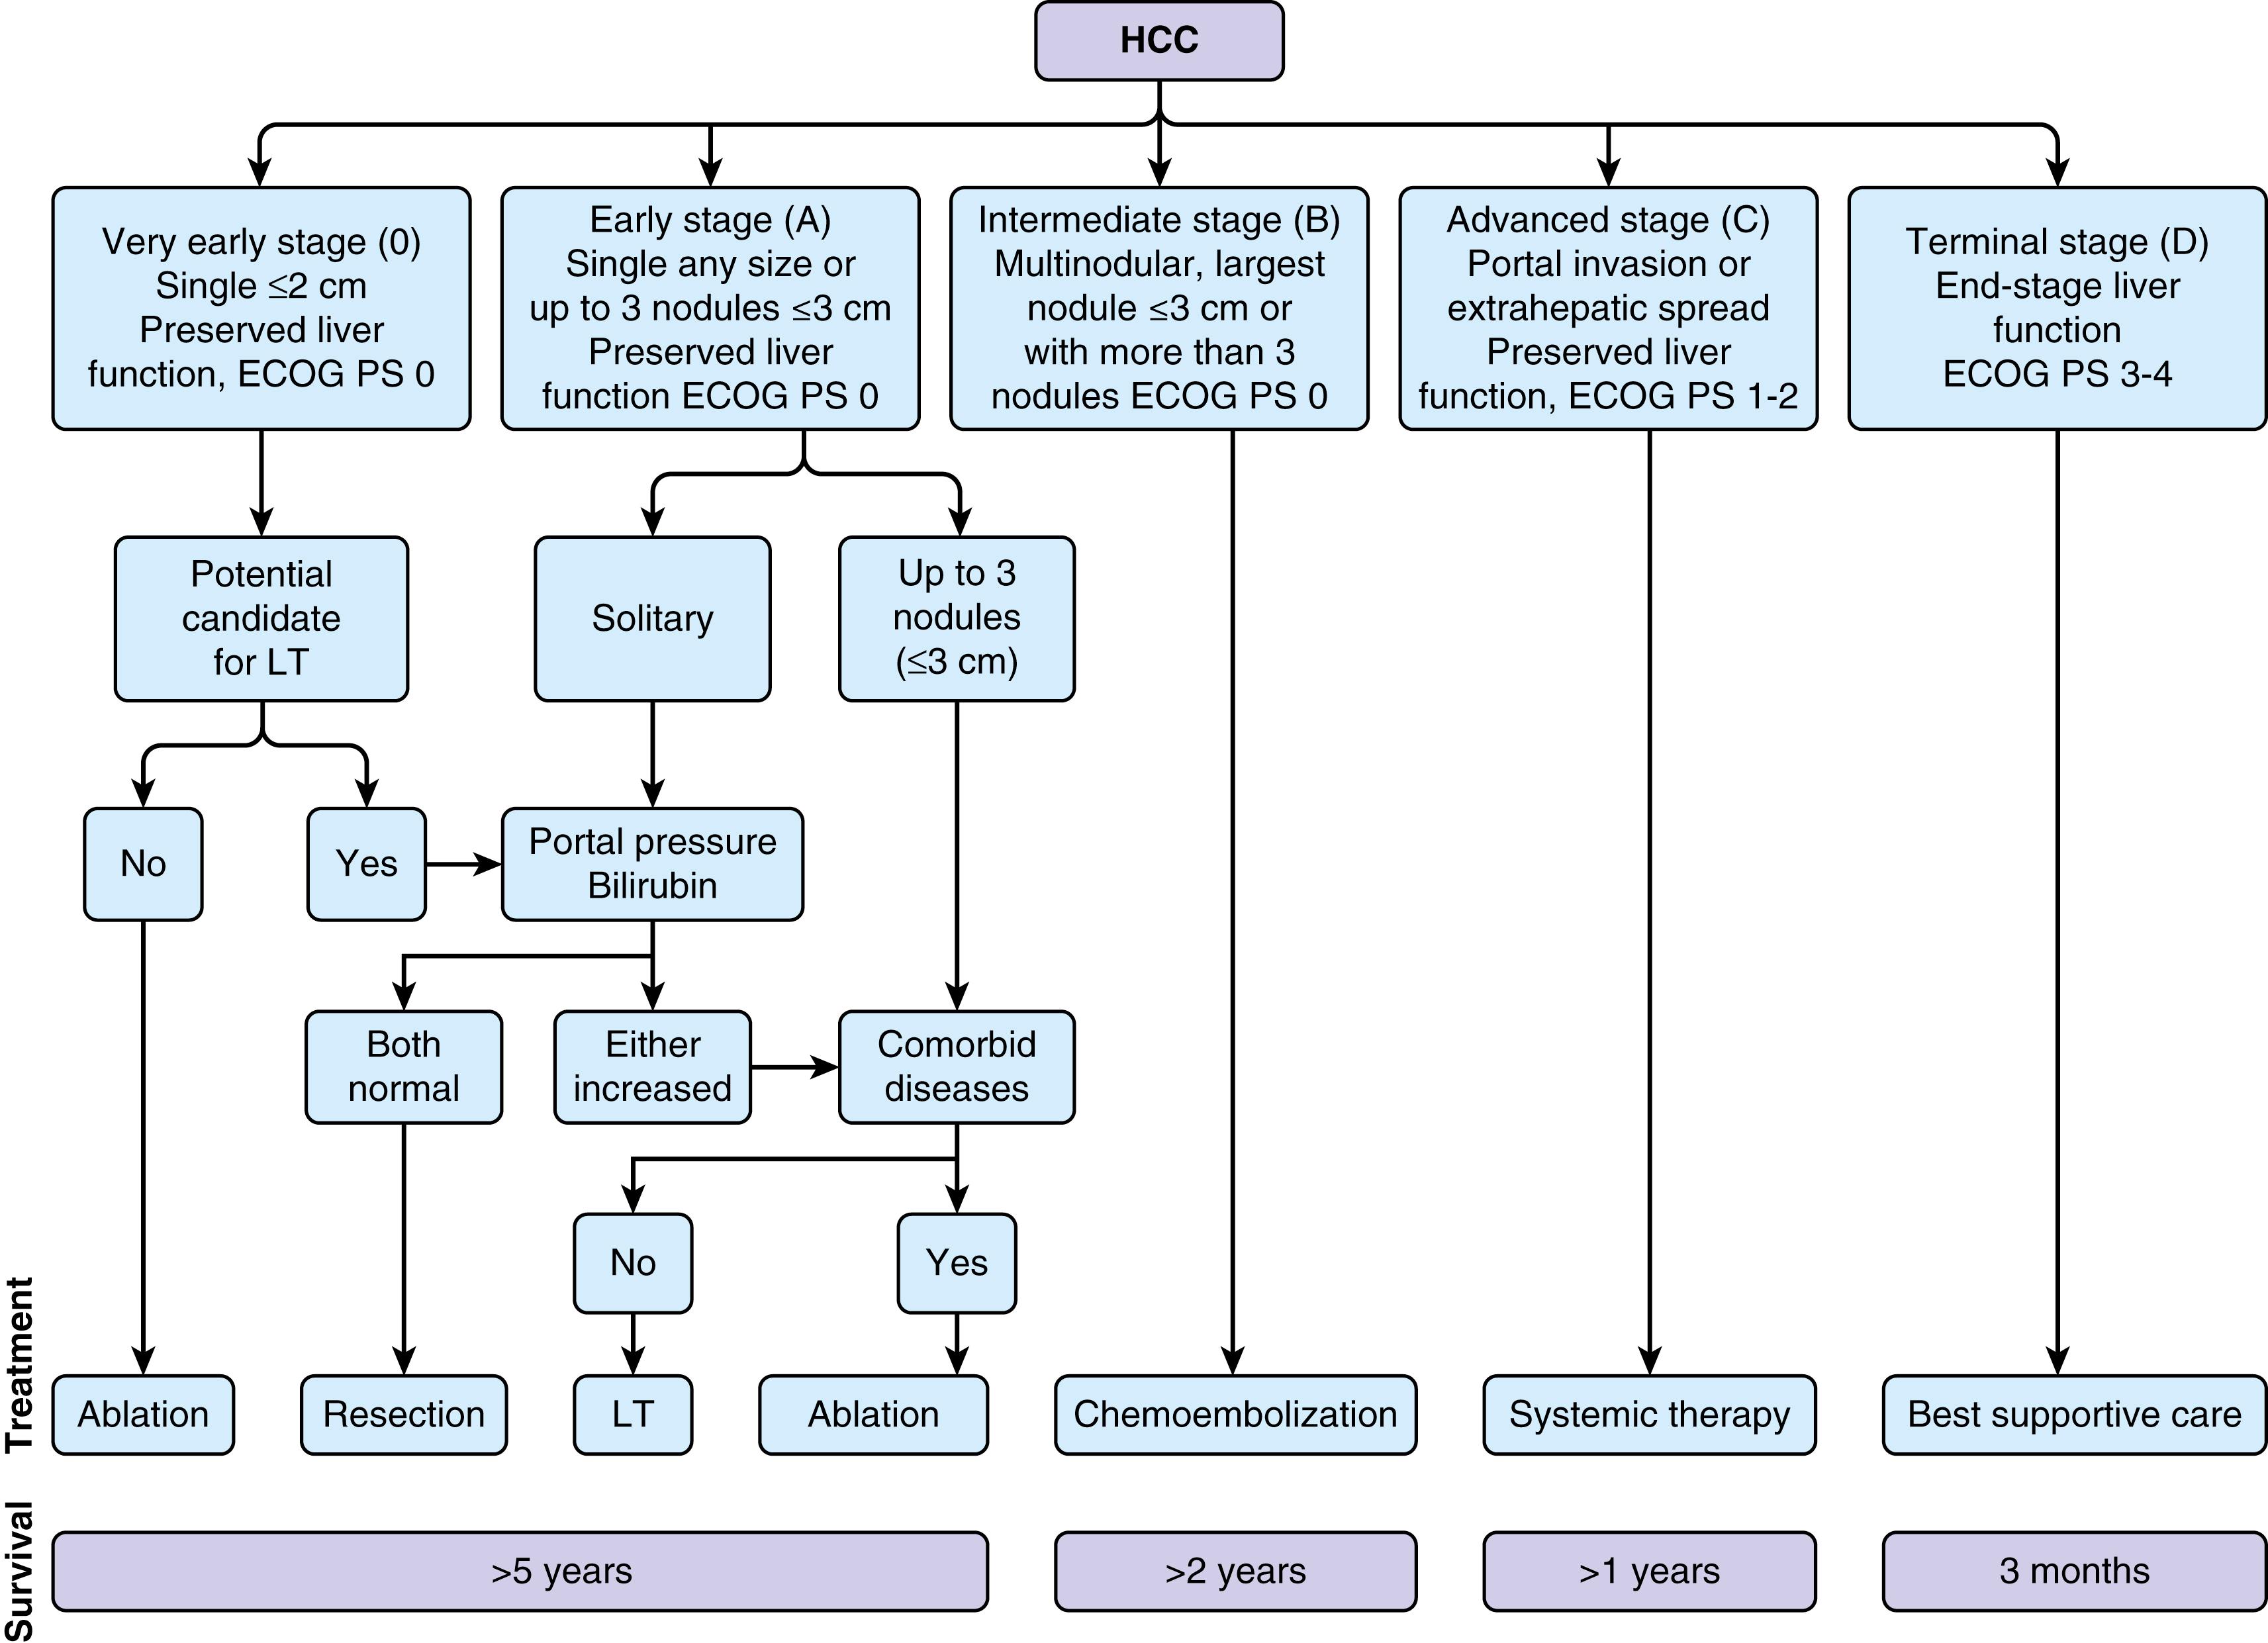 Fig. 96.4, Barcelona Clinic Liver Cancer (BCLC) staging classification and treatment schedule with associated expected survival. Staging is based on tumor size and spread, the patient’s Eastern Cooperative Oncology Group (ECOG) performance status (PS) on a scale of 0 (good) to greater than 2 (poor), and liver function as assessed by the Child-Pugh class (see Chapter 92 ). Patients with very early ( stage 0 ) HCC are optimal candidates for surgical resection. Patients with early ( stage A ) HCC are candidates for radical therapy (resection, deceased-donor LT, or live-donor LT, or local ablation via percutaneous ethanol injection or radiofrequency ablation. Patients with intermediate ( stage B ) HCC benefit from transarterial chemoembolization. Patients with advanced HCC, defined as the presence of macroscopic vascular invasion, extrahepatic spread, or cancer-related symptoms (PS 1 or 2) ( stage C ), benefit from sorafenib or lenvantanib as first-line and regorafenib or nivolumab as second-line therapy. Patients with end-stage disease ( stage D ) should receive symptomatic treatment. The treatment strategy will transition from one stage to another when treatment fails or is contraindicated.